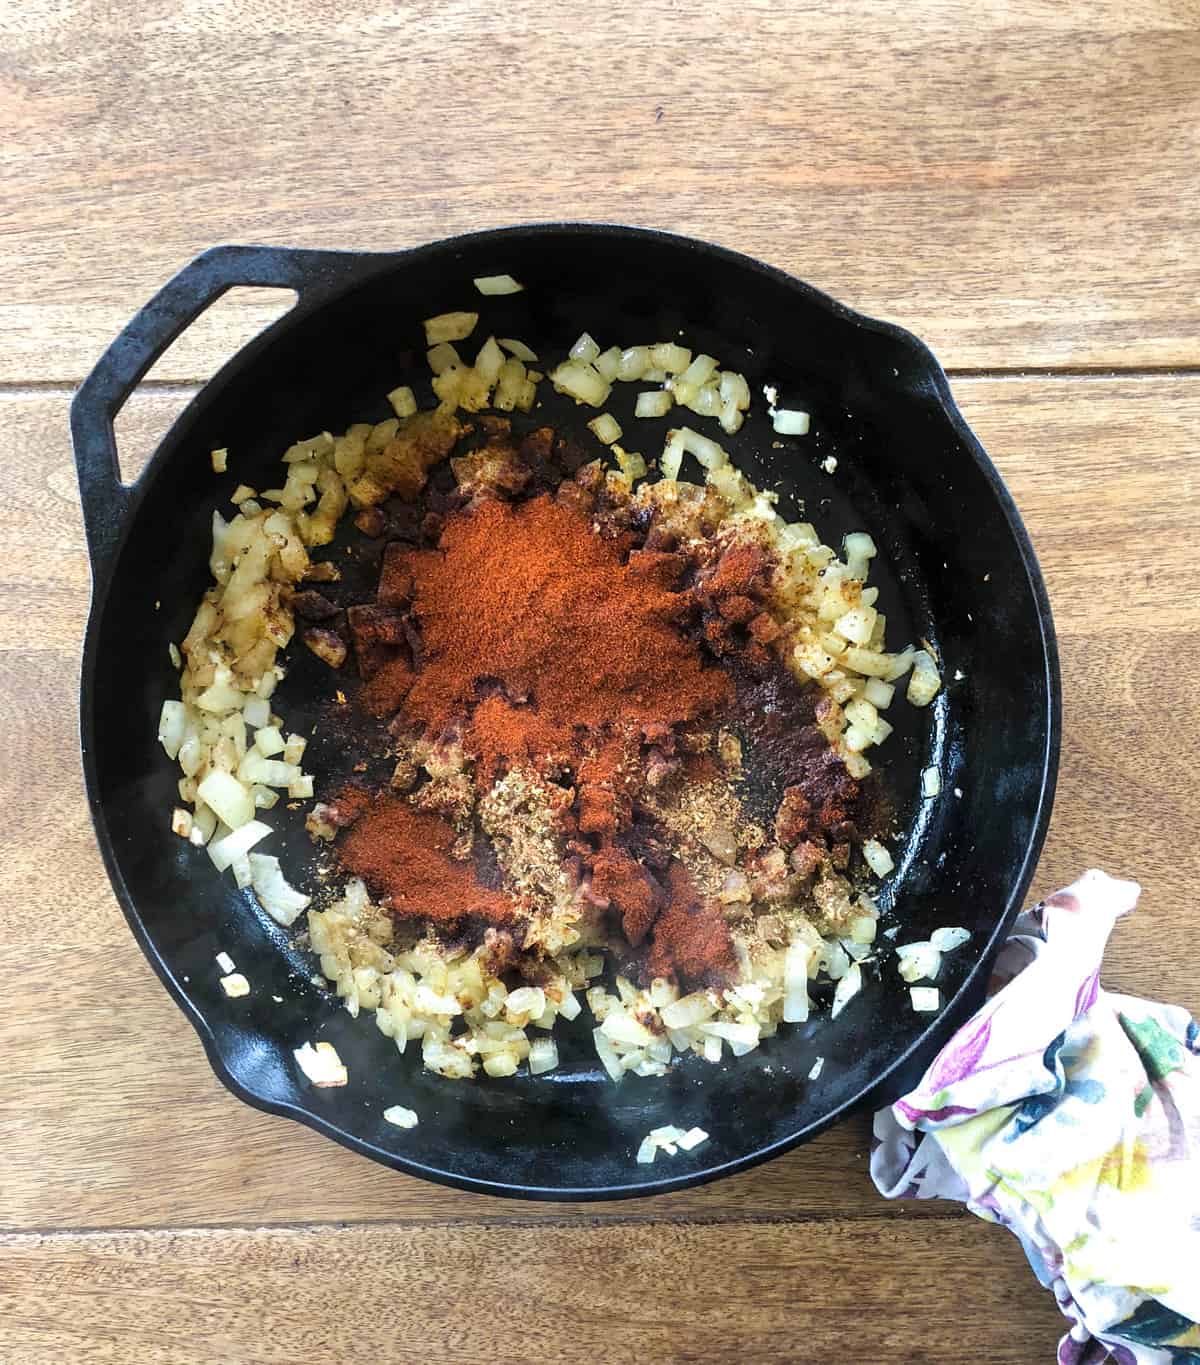 Pour two tablespoons of olive oil into a skillet and heat over medium heat. Add diced onion, garlic, and all the spices. 